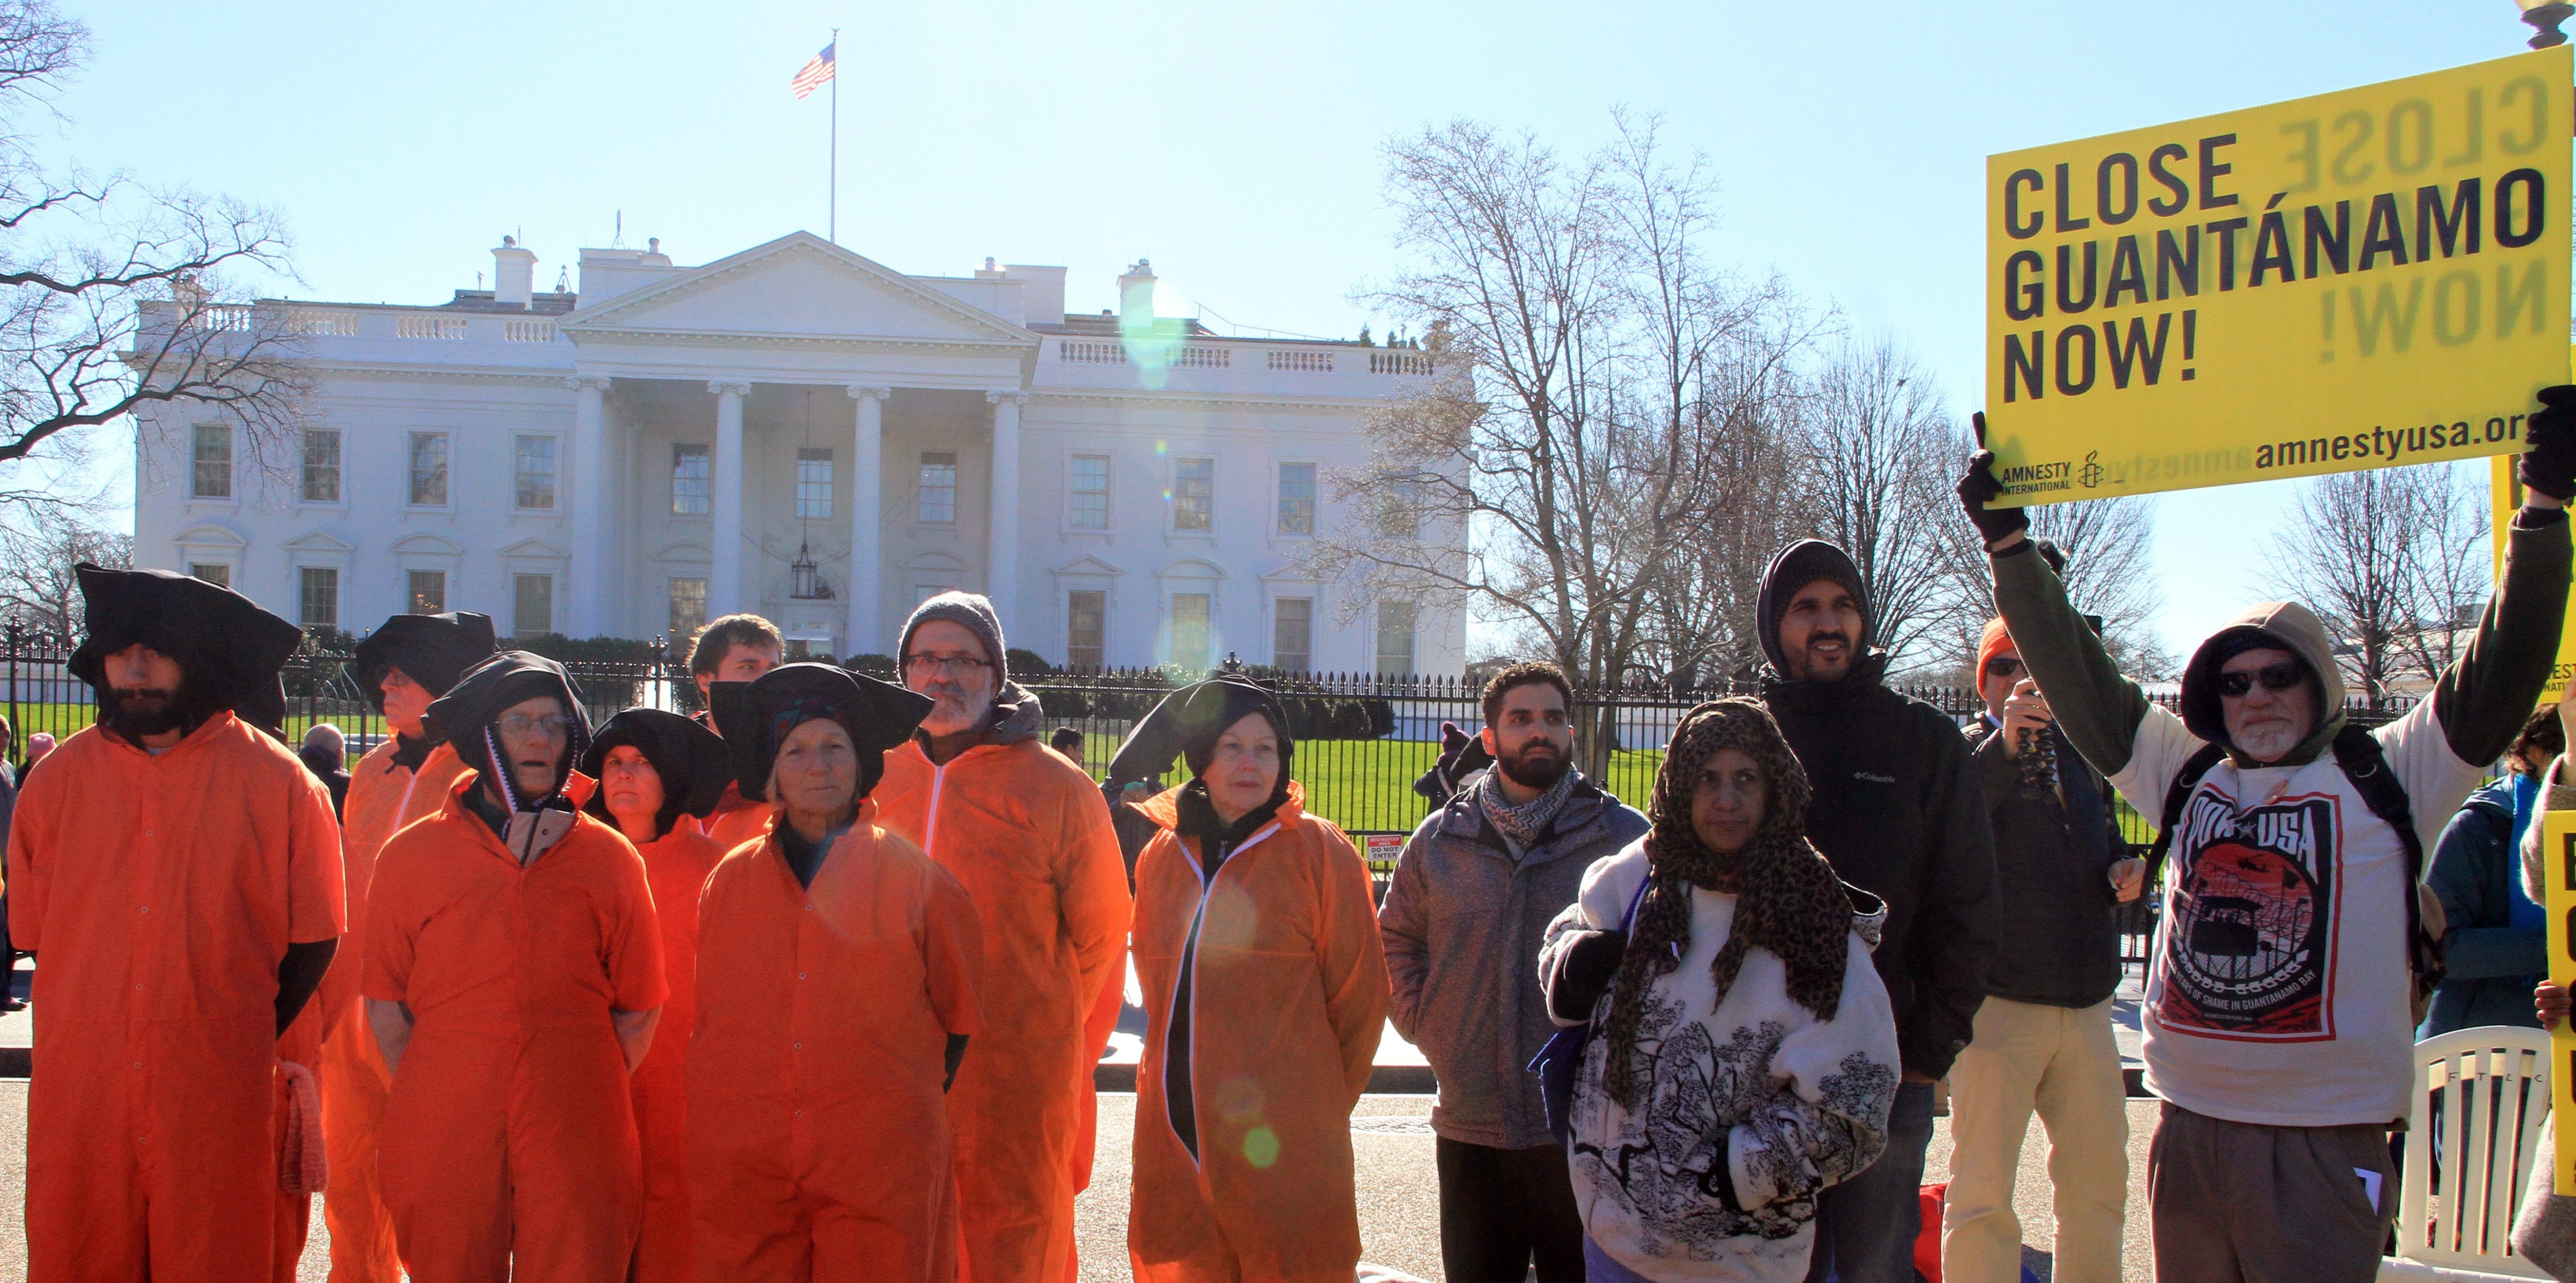 Protesters, worn orange jumpsuits those symbolize Guantanamo Bay detainees, attend a protest in front of the White House in Washington D.C, USA on January 11, 2016. (Erkan Avci&mdash;Anadolu Agency/Getty Images)